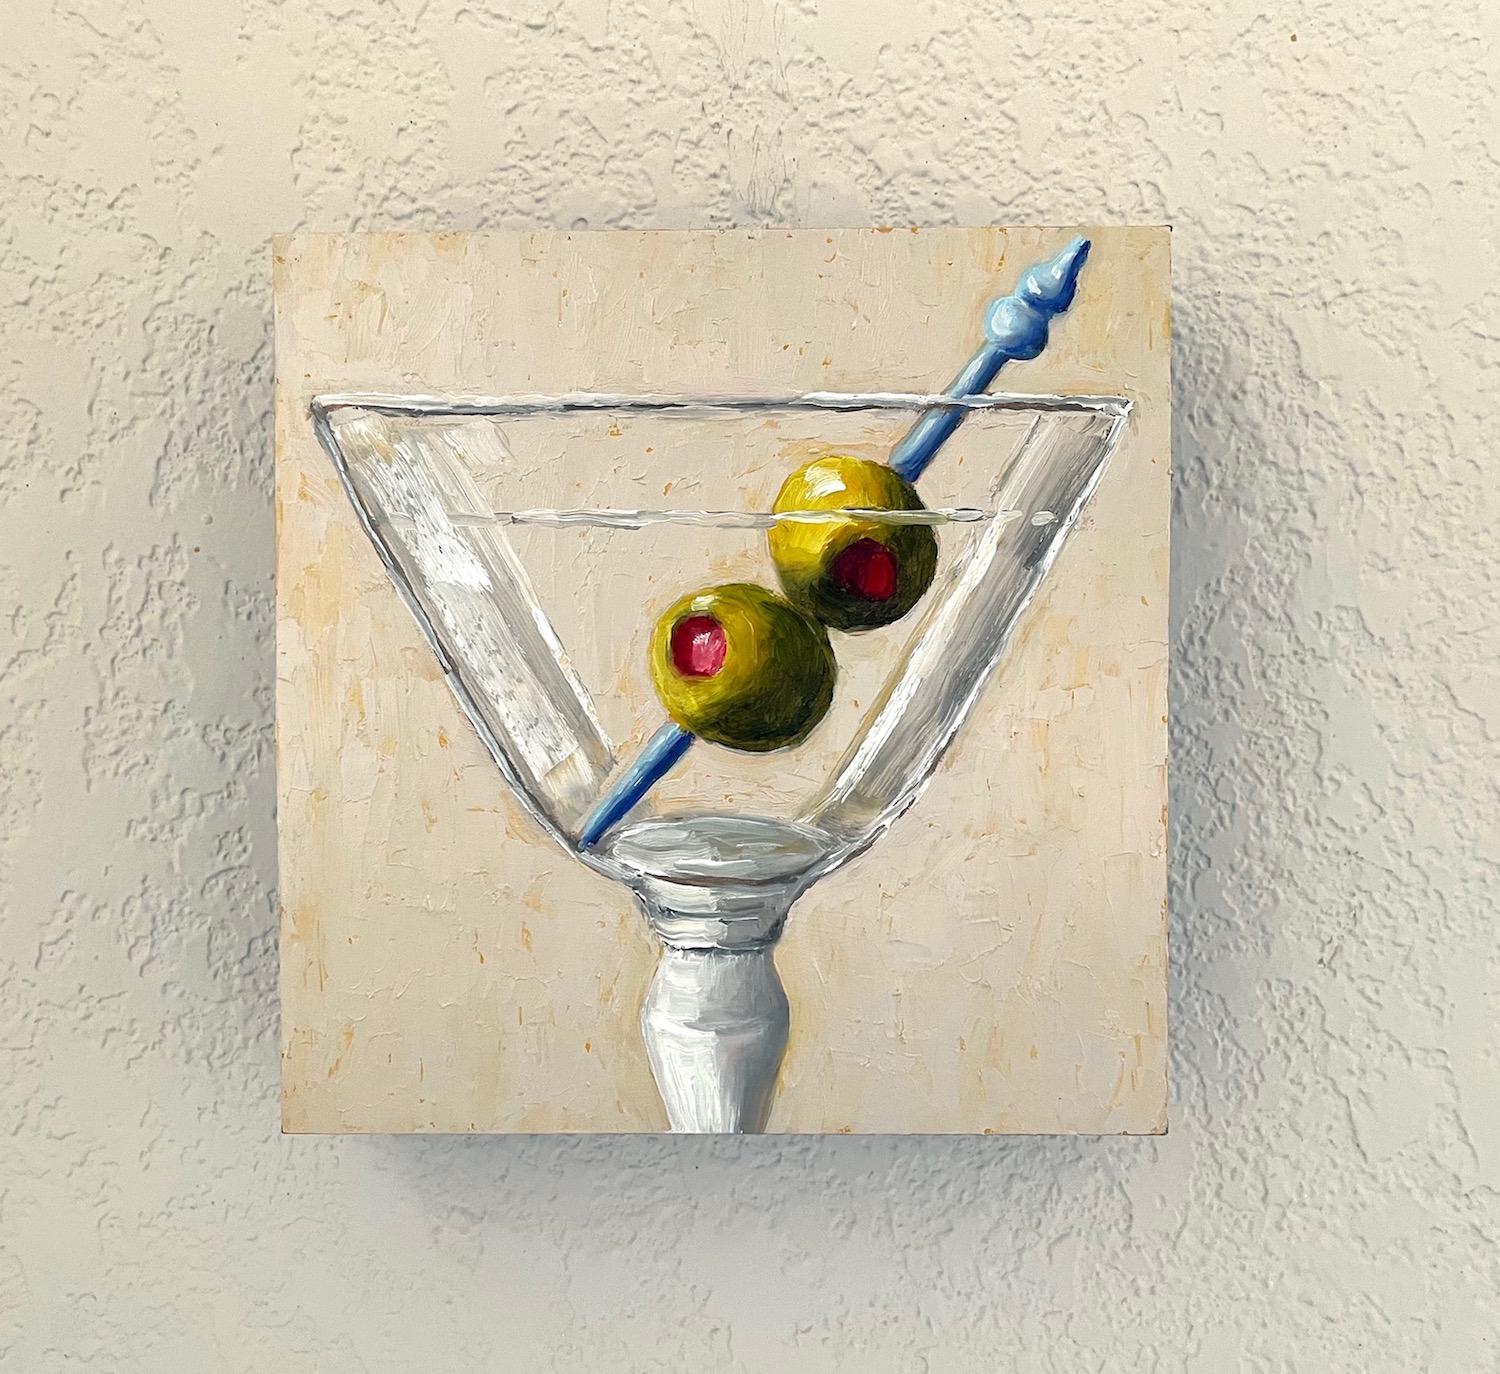 <p>Artist Comments<br>A sleek glass cradles a sophisticated drink. The alcohol reflects a subtle elegance, while the vivid green olives and a contrasting blue skewer add a burst of color against the beige background. The artwork emphasizes a